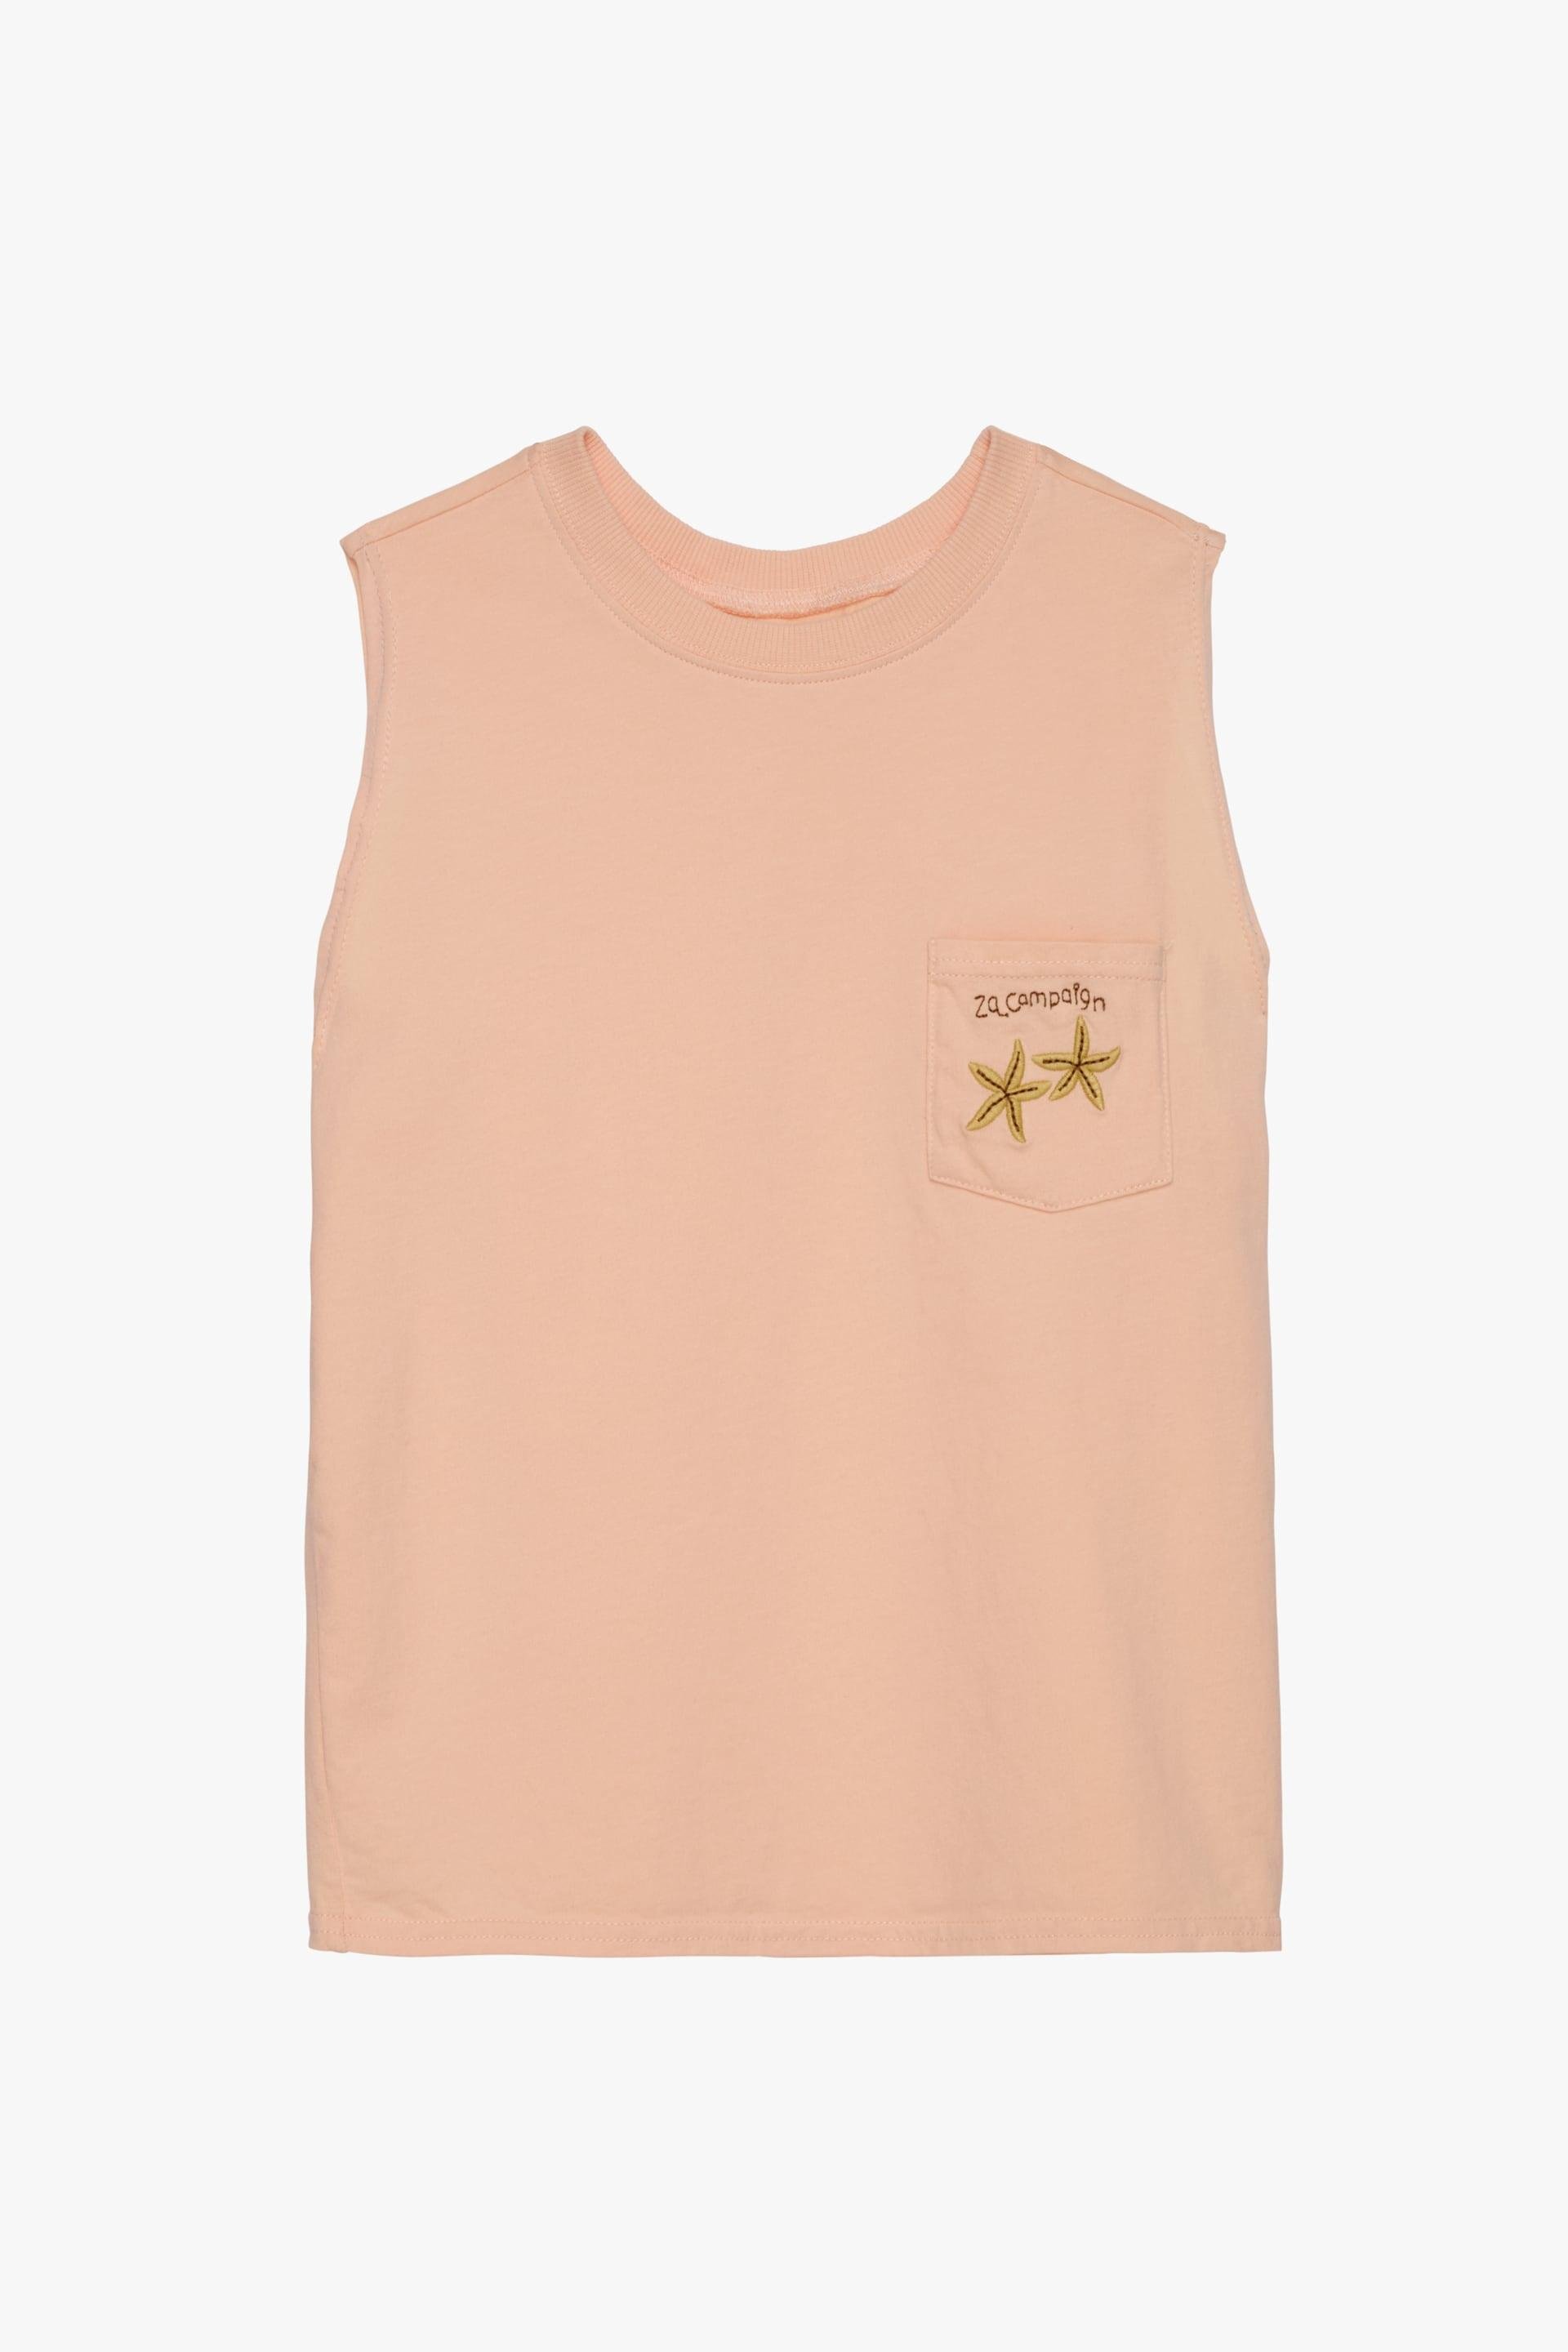 EMBROIDERED POCKET TANK TOP LIMITED EDITION by ZARA